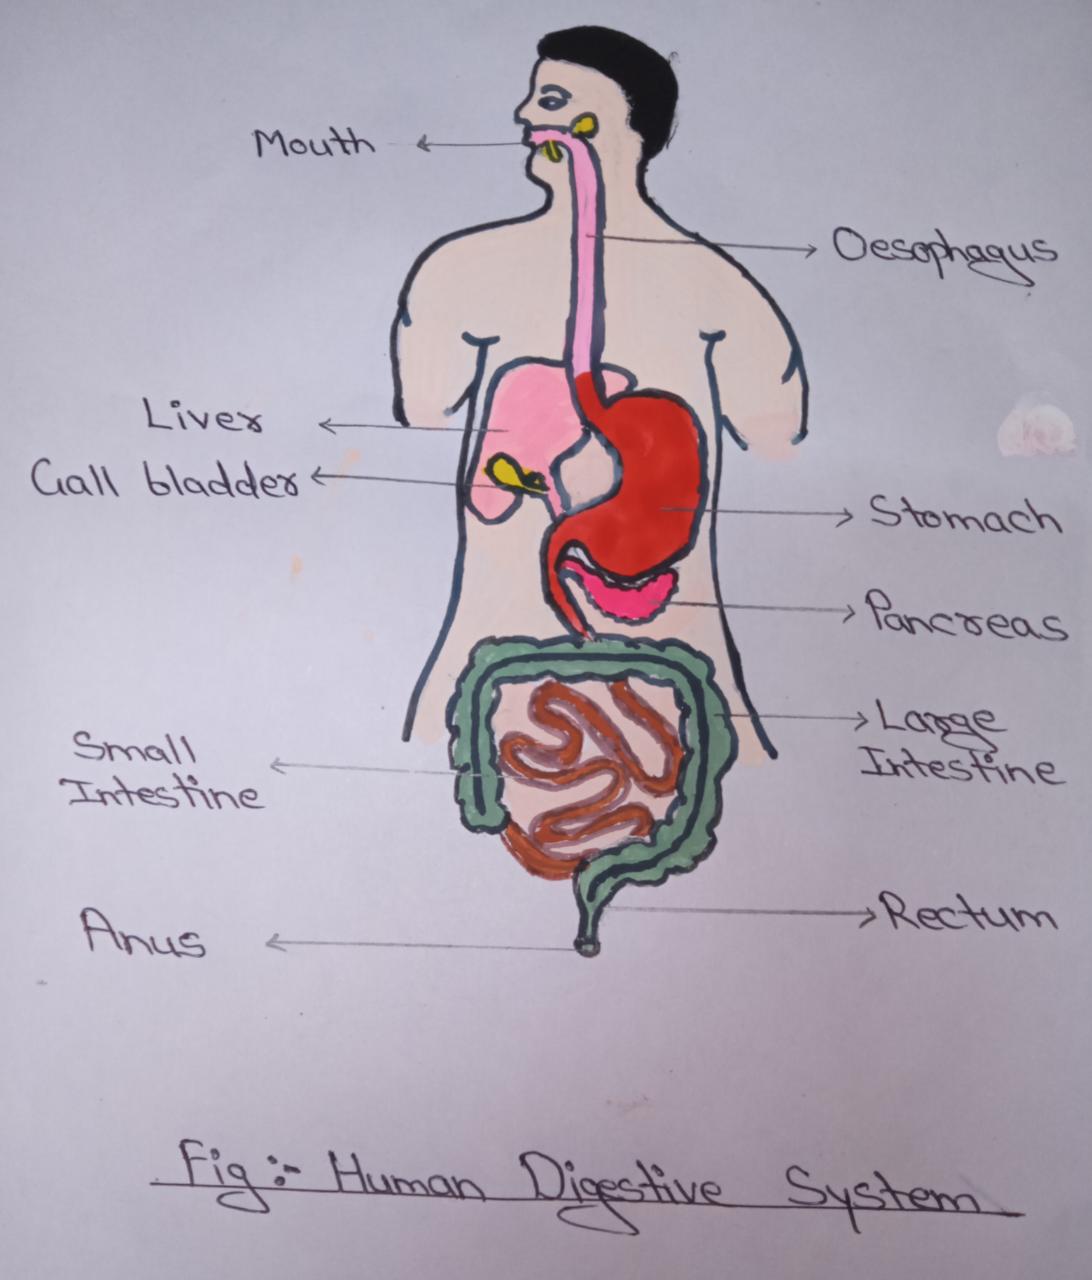 essay on how the digestive system works